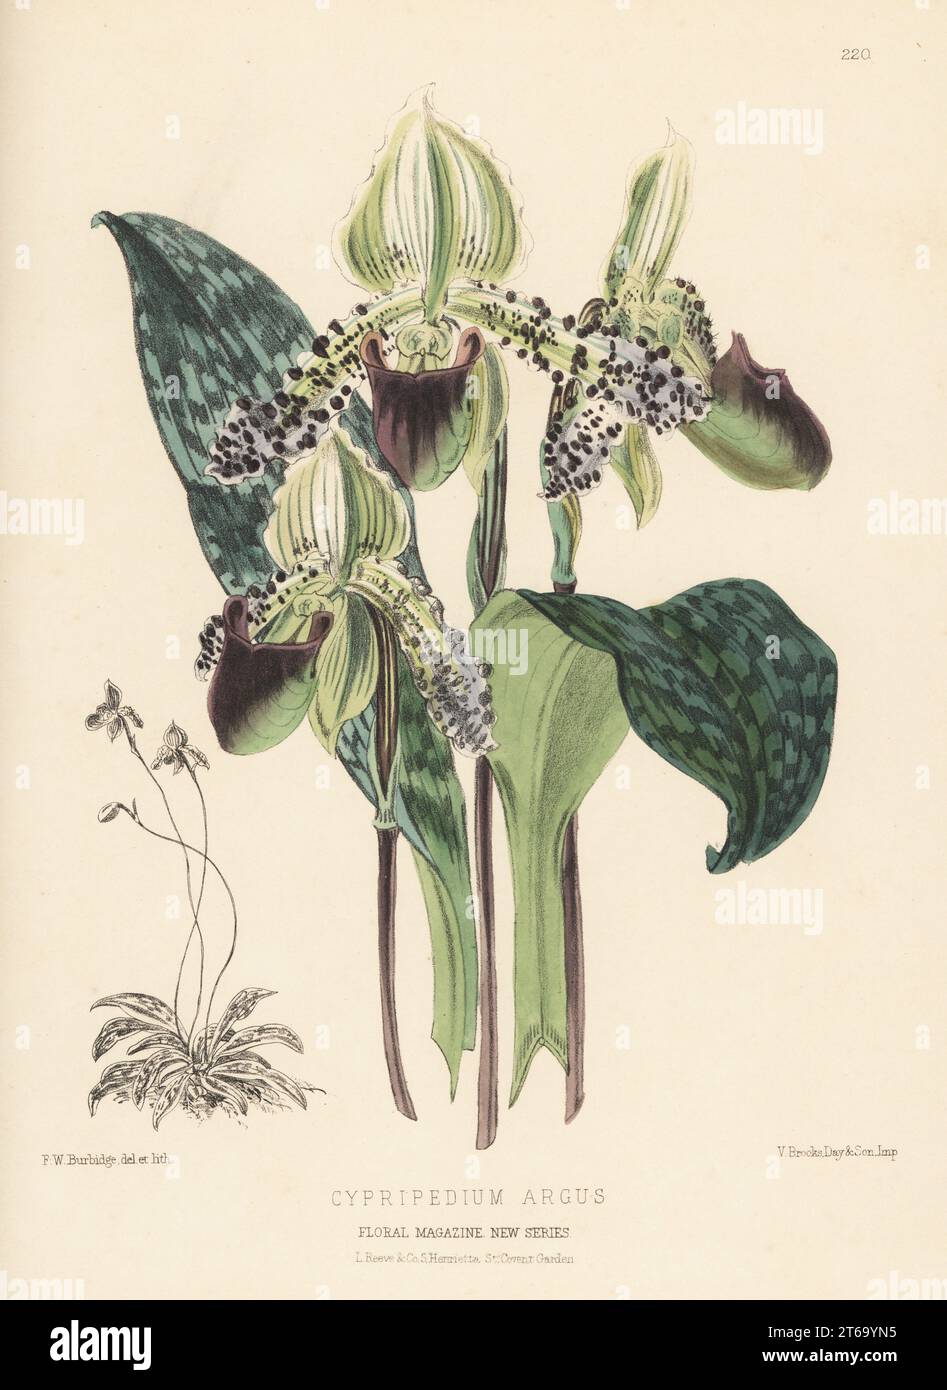 Paphiopedilum argus orchid, native to Luzon island, the Philippines. Introduced by James Veitch and Sons nursery, King's Road, Chelsea. As Cypripedium argus. Handcolored botanical illustration drawn and lithographed by Frederick William Burbidge from Henry Honywood Dombrain's Floral Magazine, New Series, Volume 5, L. Reeve, London, 1876. Lithograph printed by Vincent Brooks, Day & Son. Stock Photo